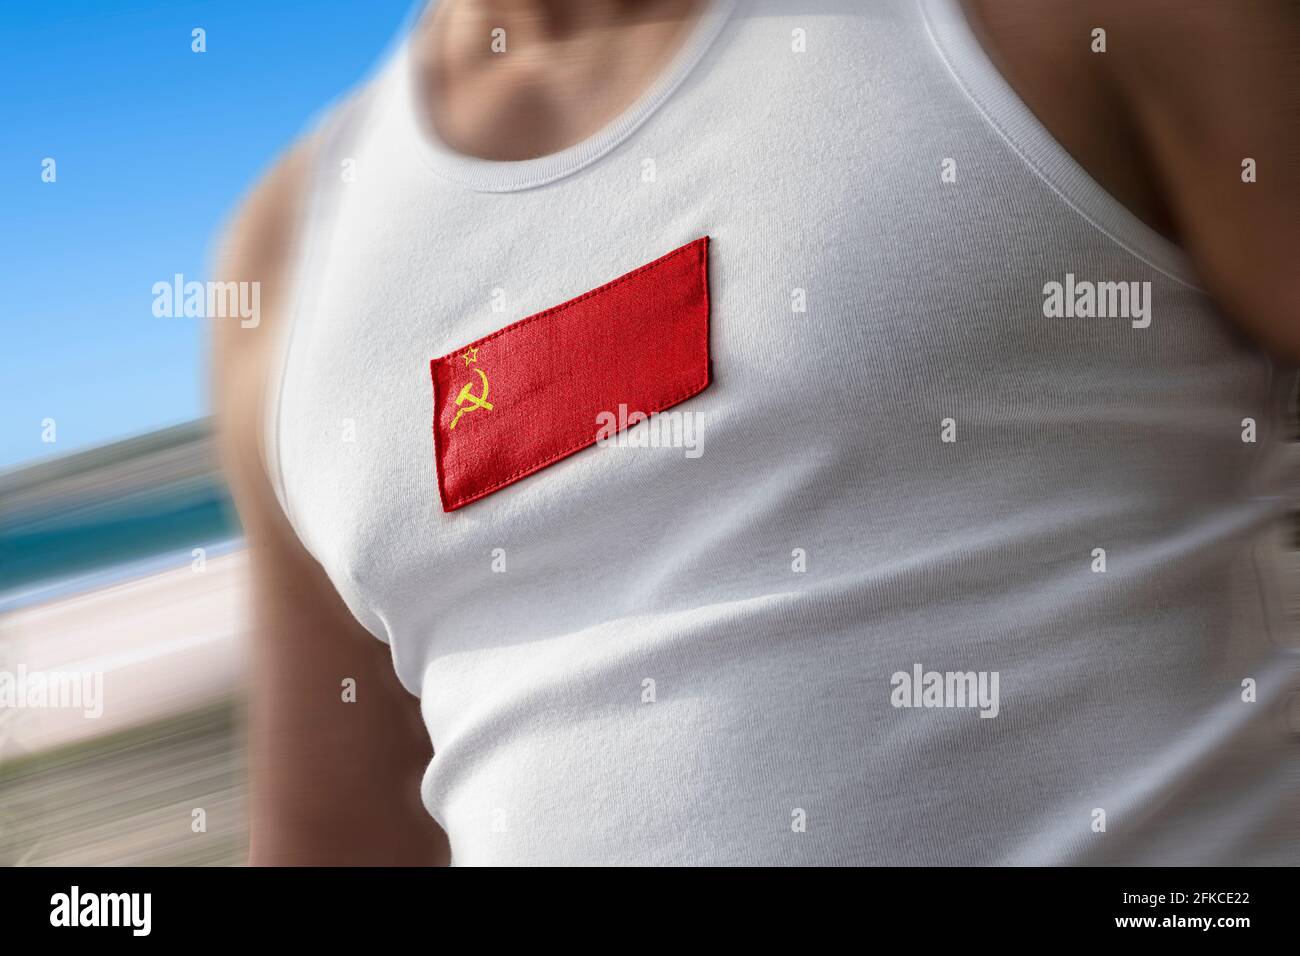 The national flag of USSR on the athlete's chest Stock Photo